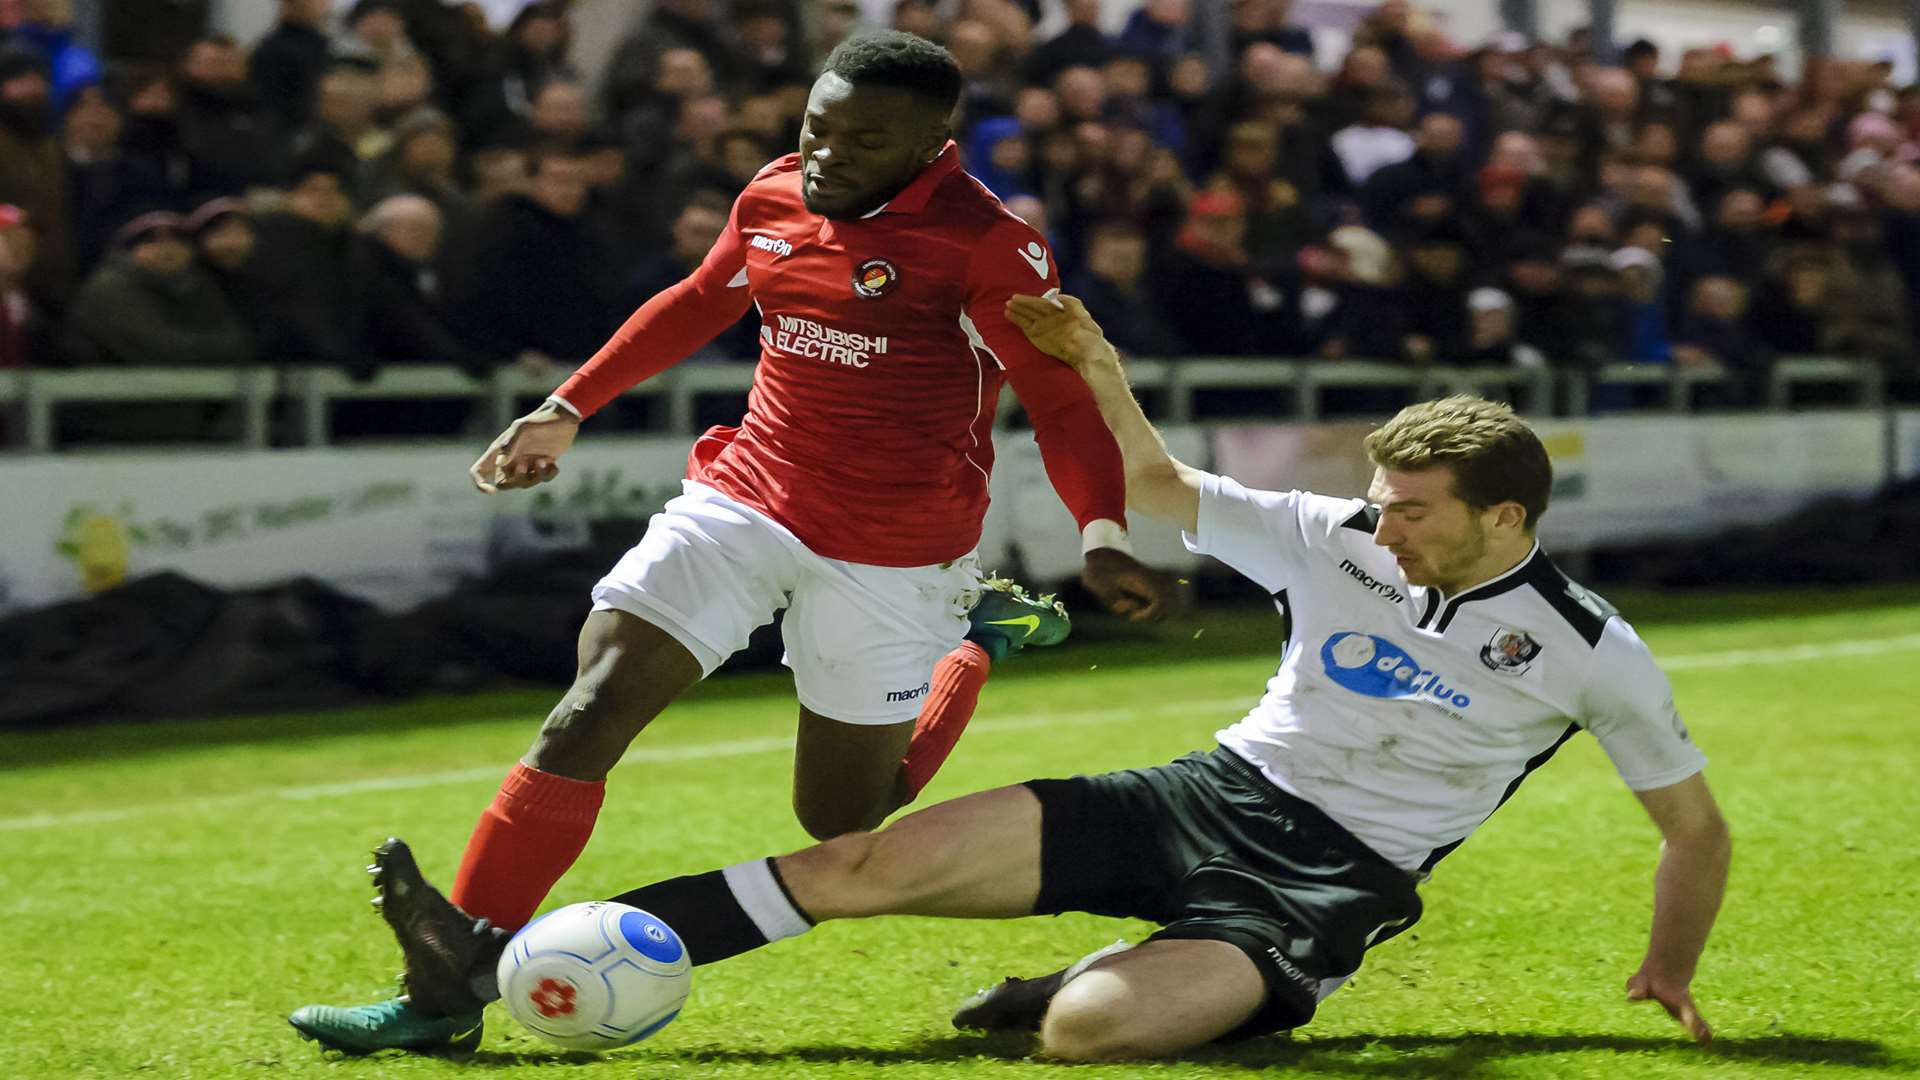 Darts defender Ronnie Vint slides in against Ebbsfleet's Anthony Cook. Picture: Andy Payton